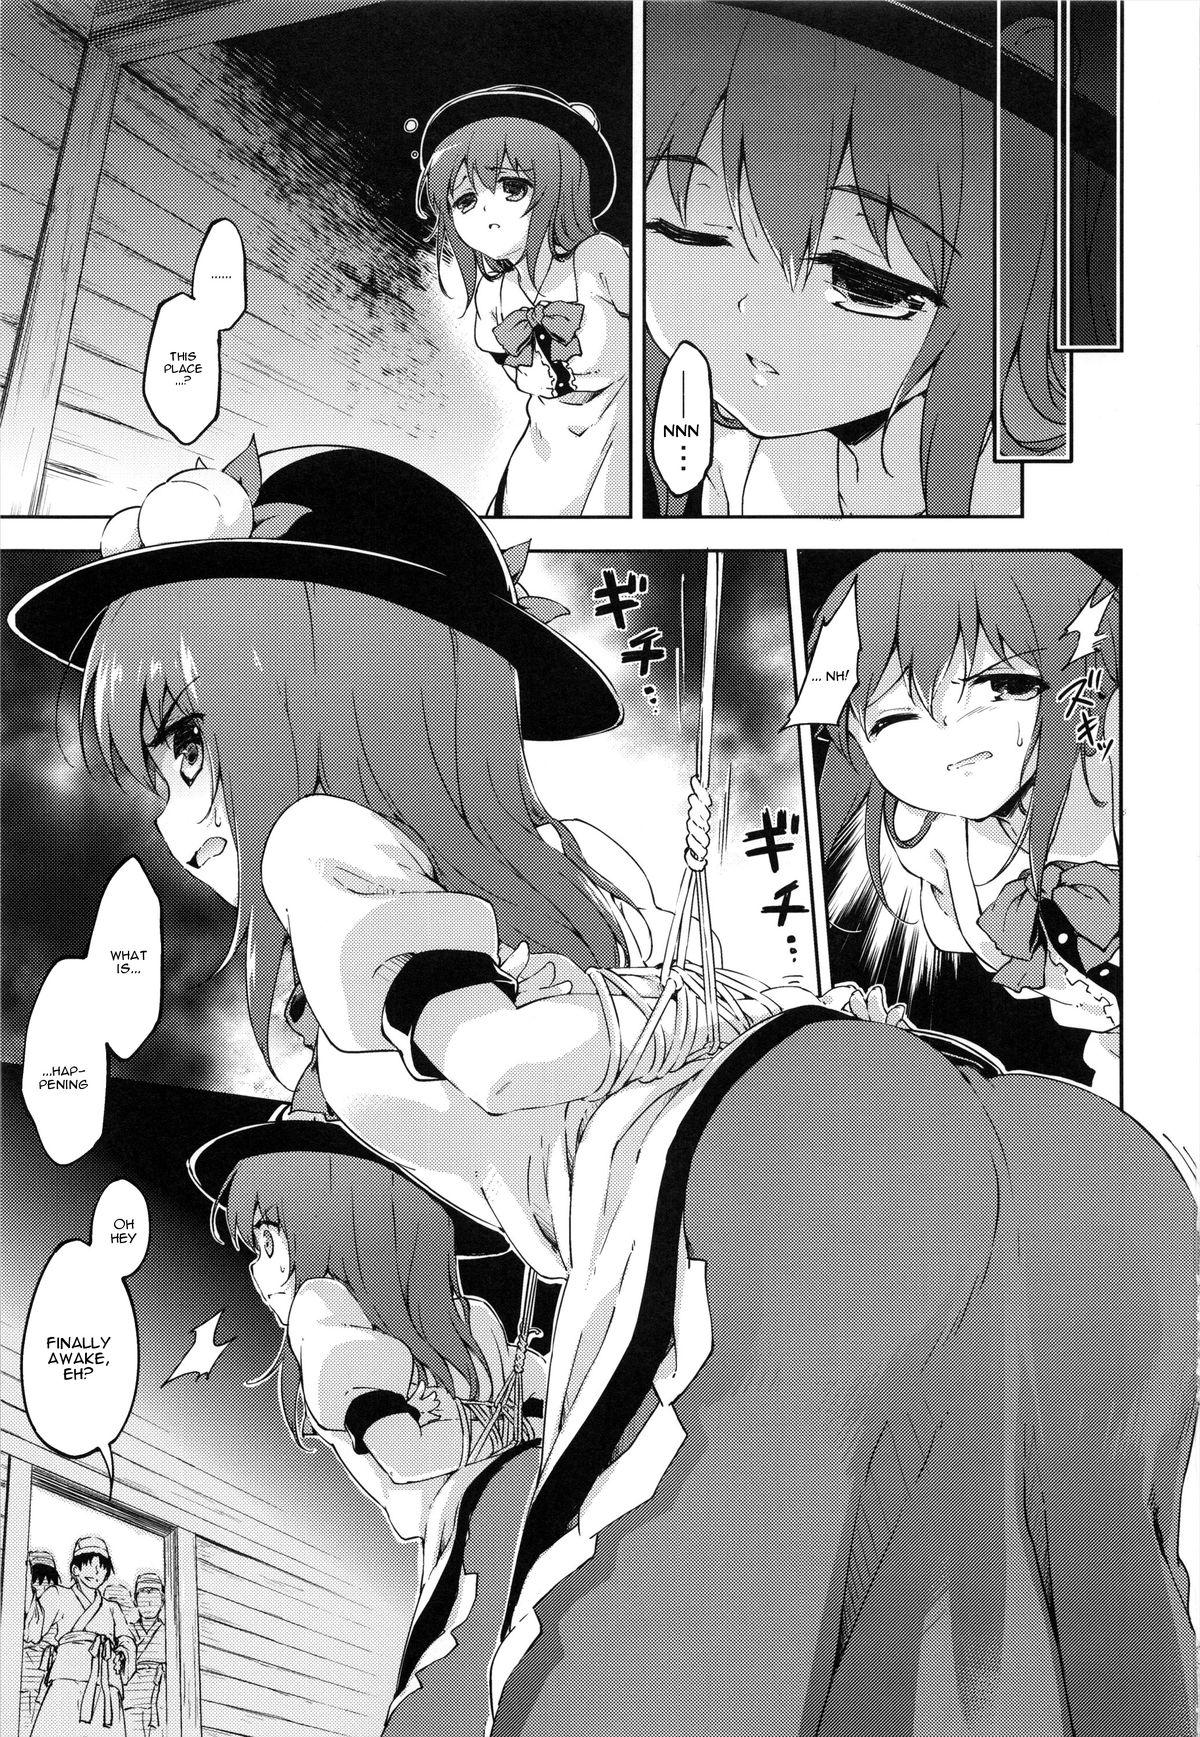 Leaked Gouganhuson no Mukui | A Retribution For Arrogance - Touhou project Nasty Porn - Page 3